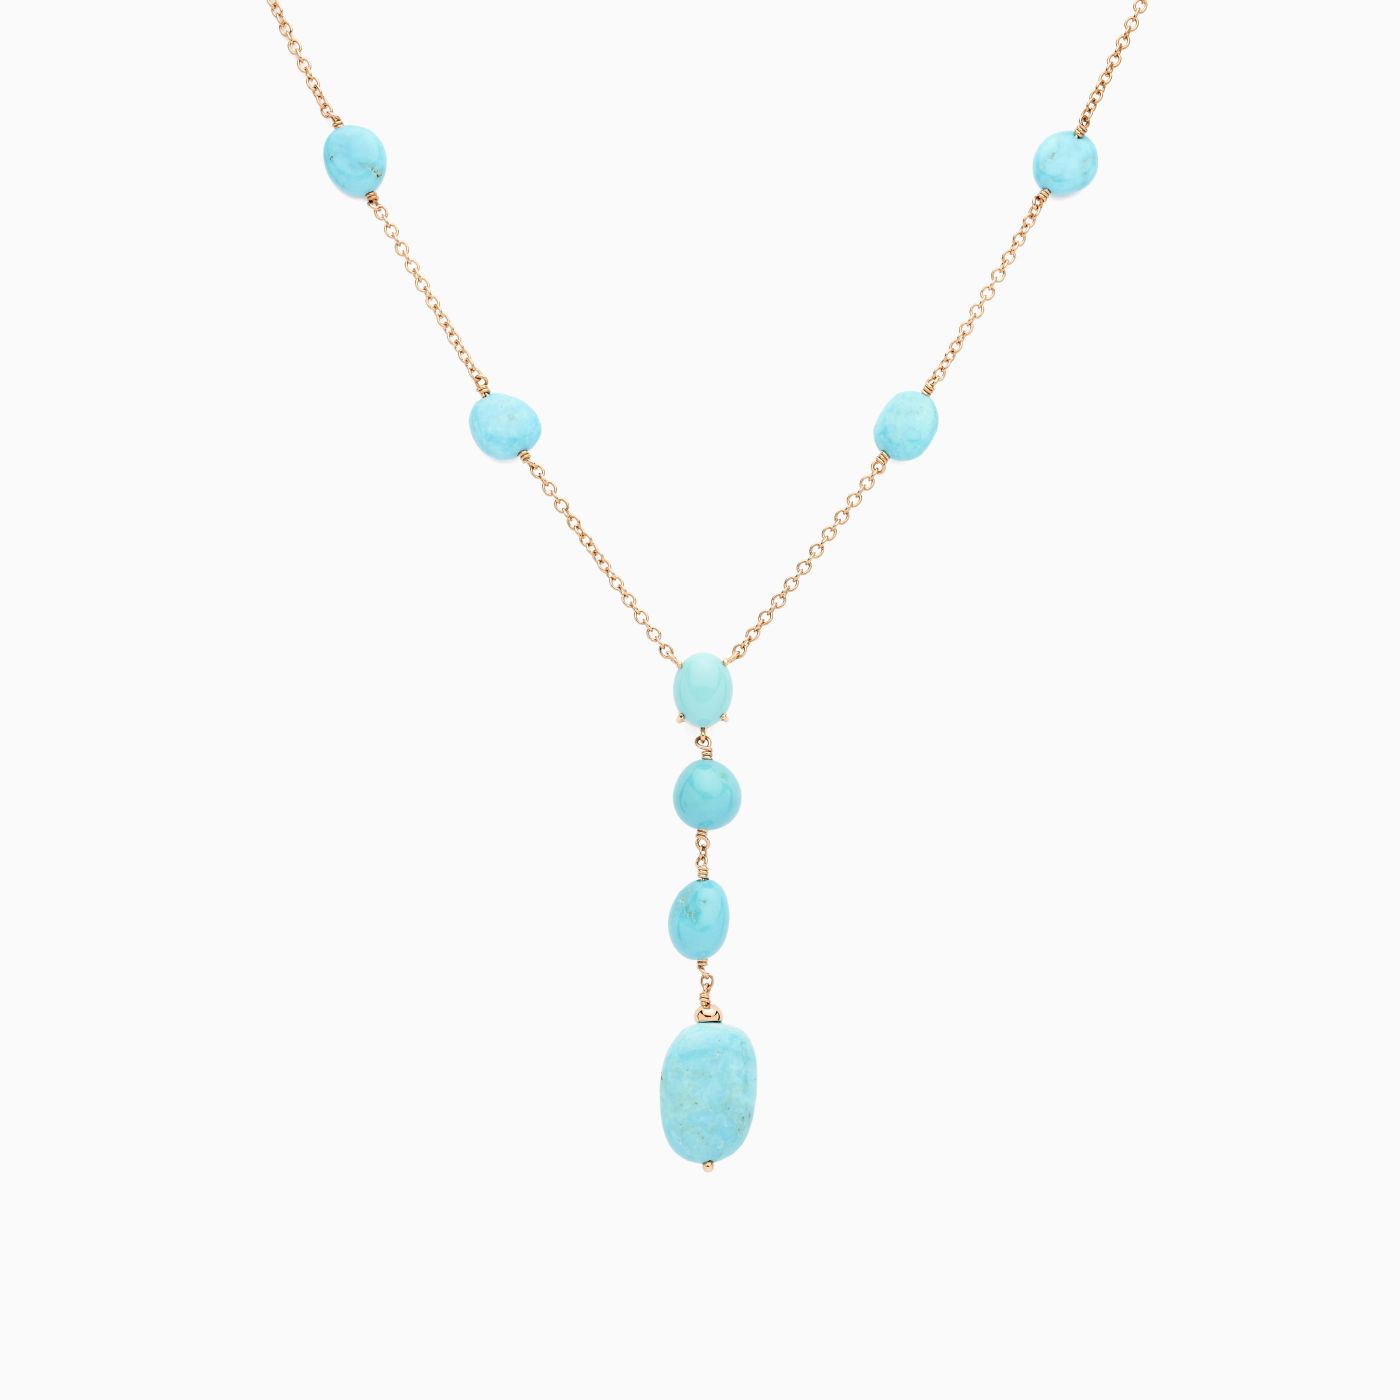 Rose gold necklace with turquoise gems